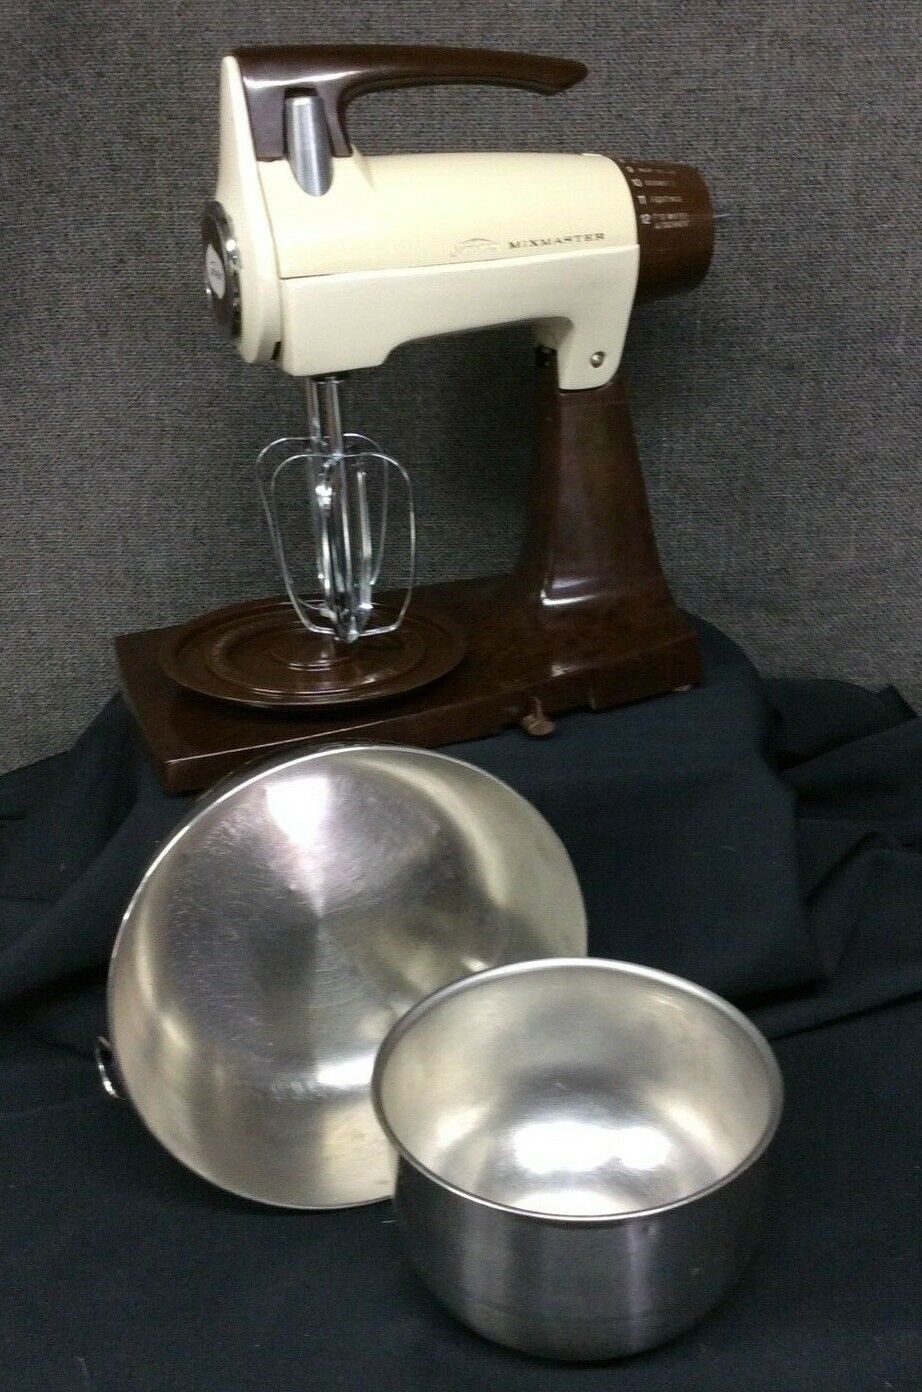 Vintage Sunbeam Mixmaster Stand Mixer 12 Speed, 2 Bowls, 2 Beaters